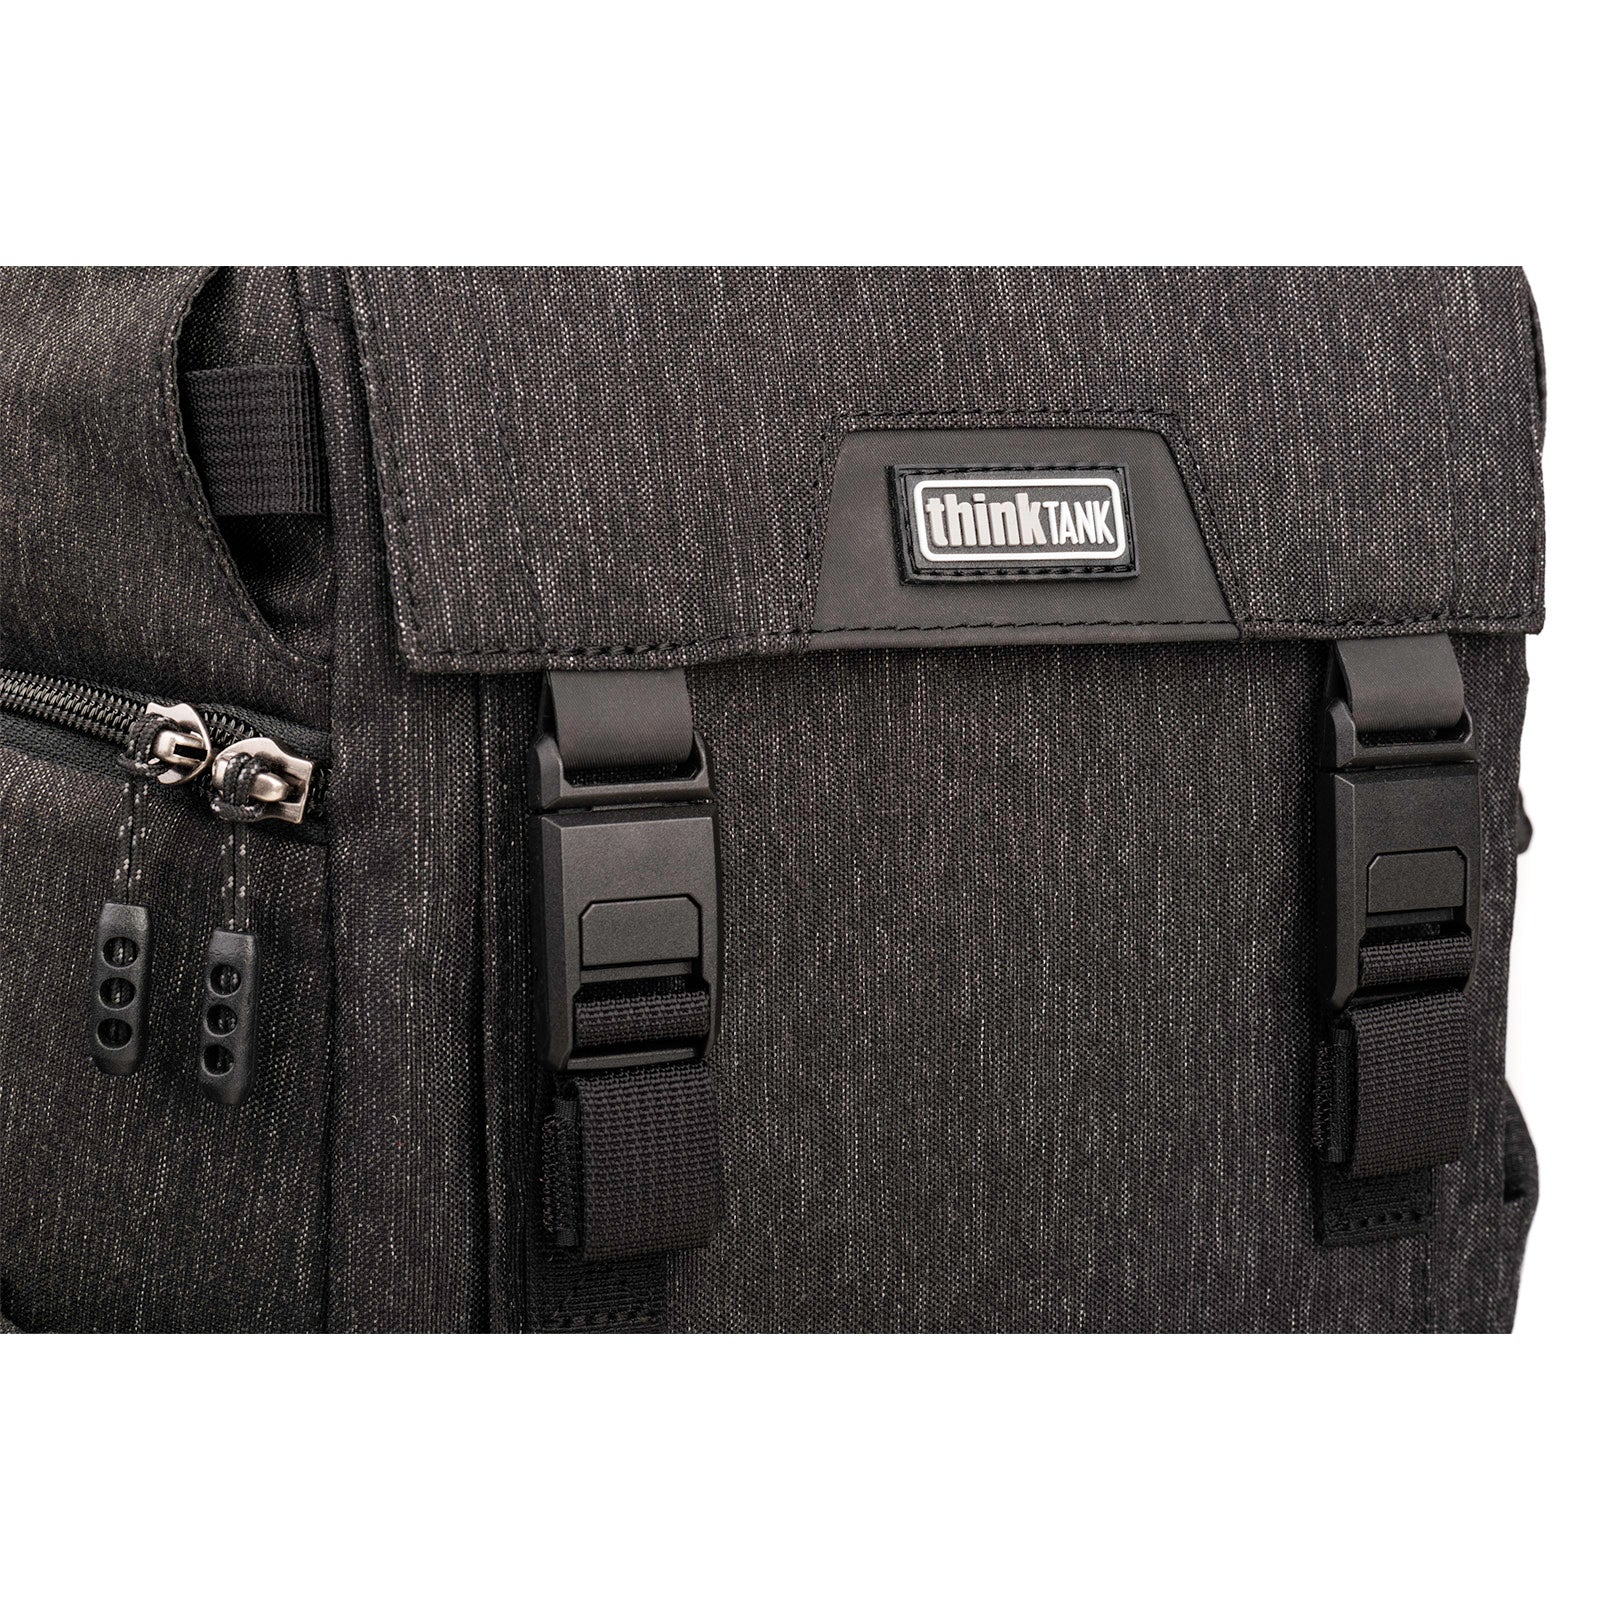 Magnetic buckles for easy access to front pocket